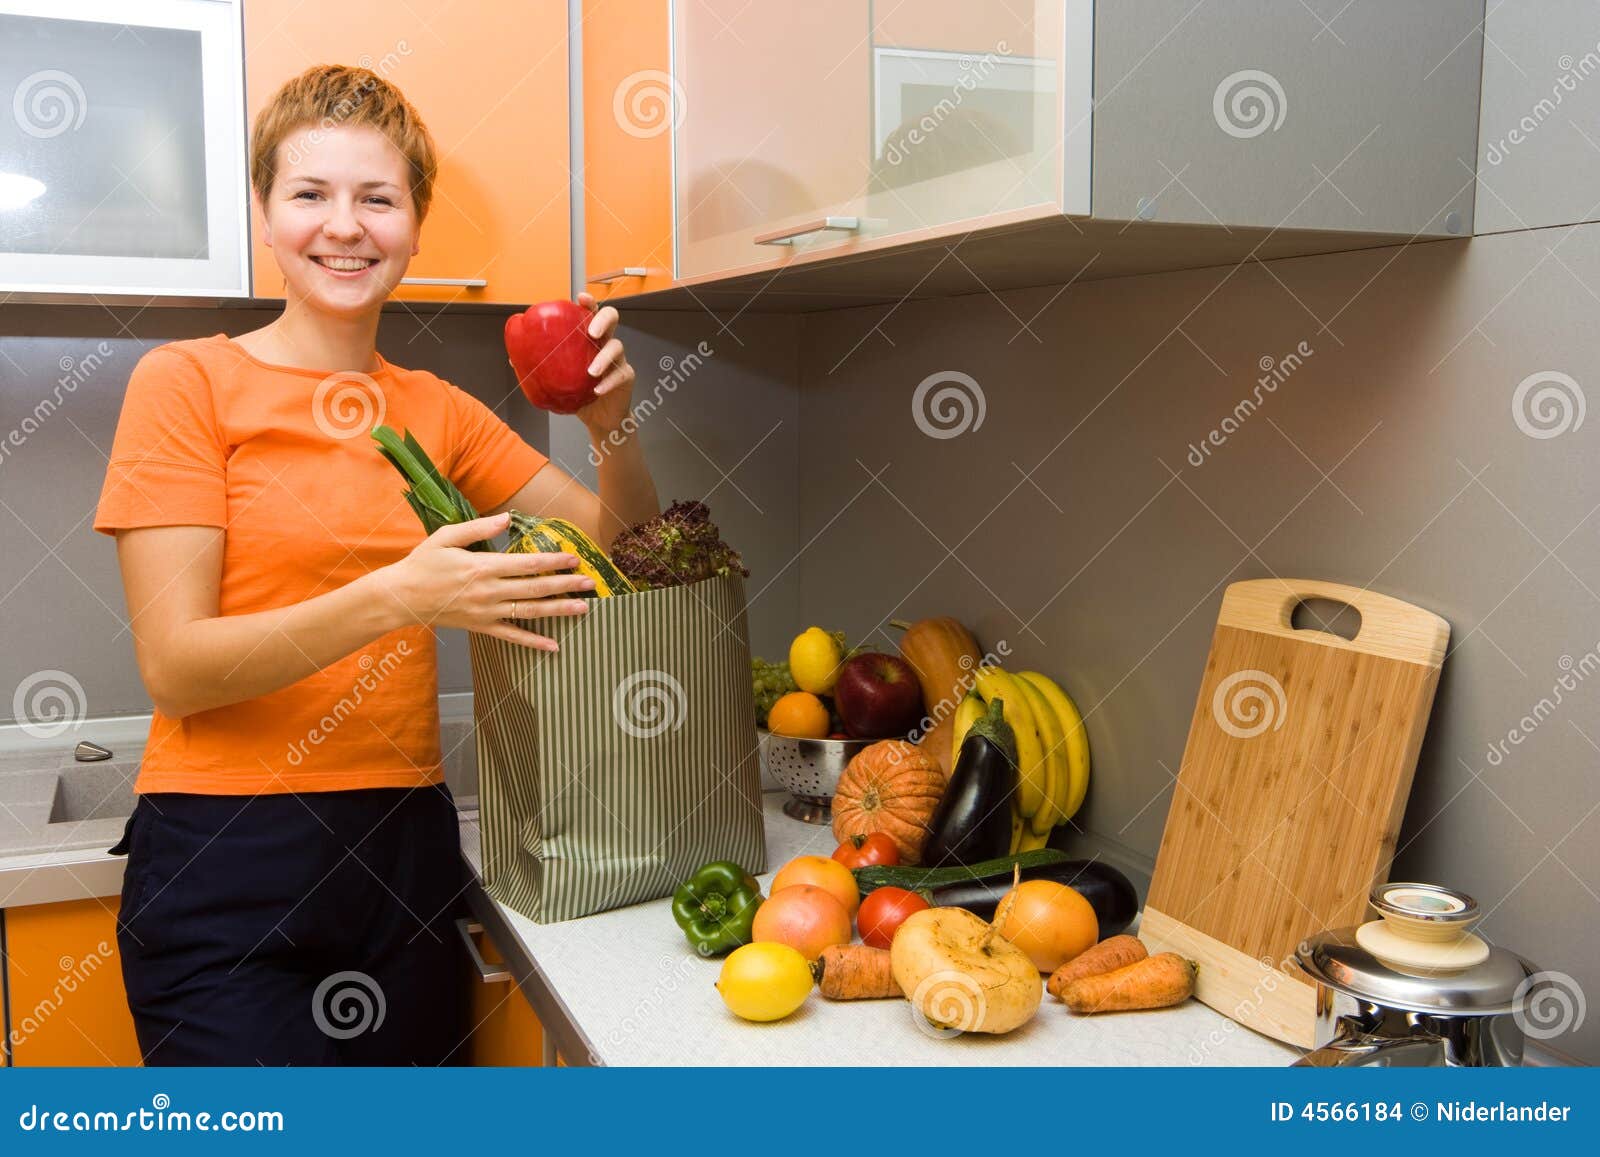 Girl with vegetables stock photo. Image of lifestyles - 4566184